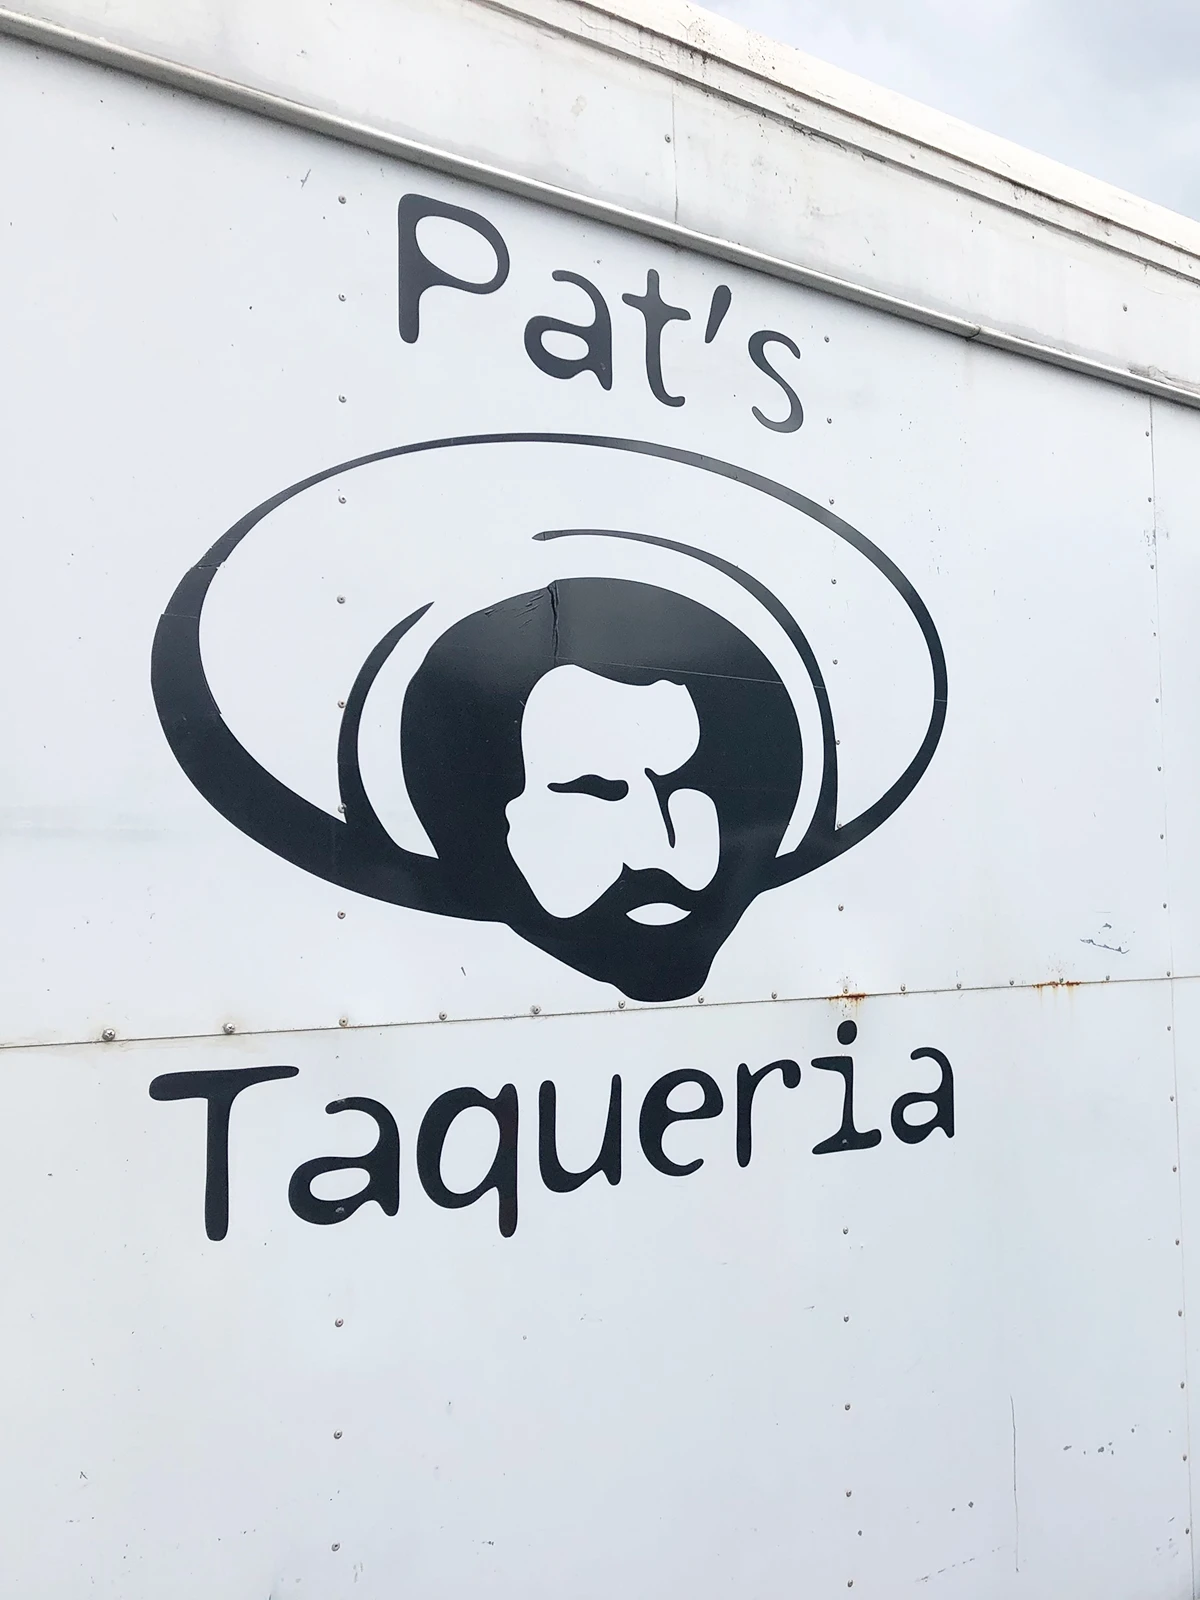 pats taqueria sign with man wearing sombrero